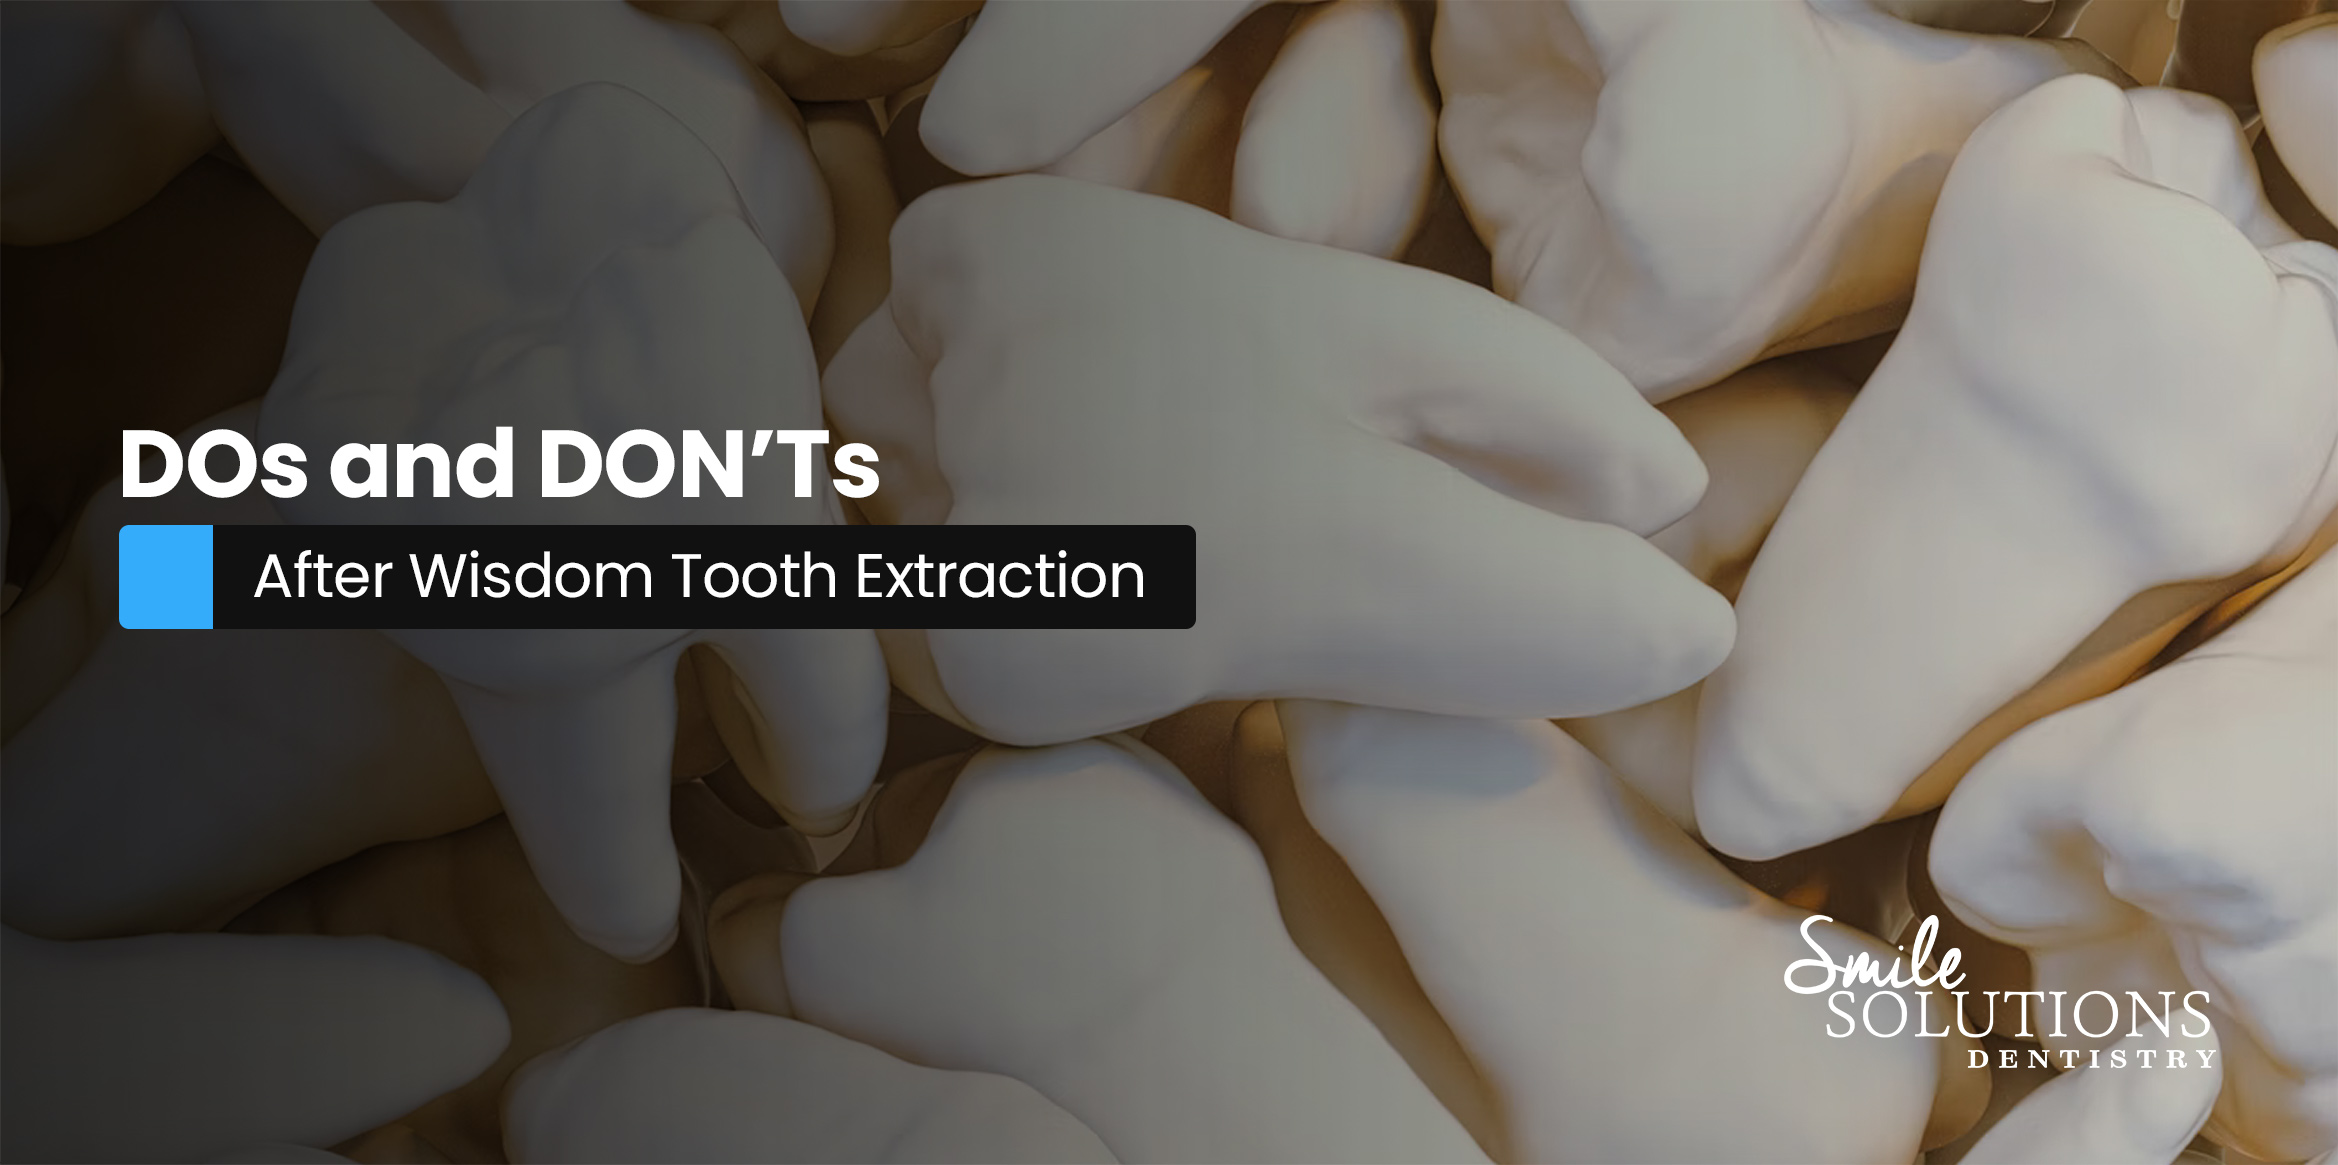 Do's and Dont's After Wisdom Tooth Extraction